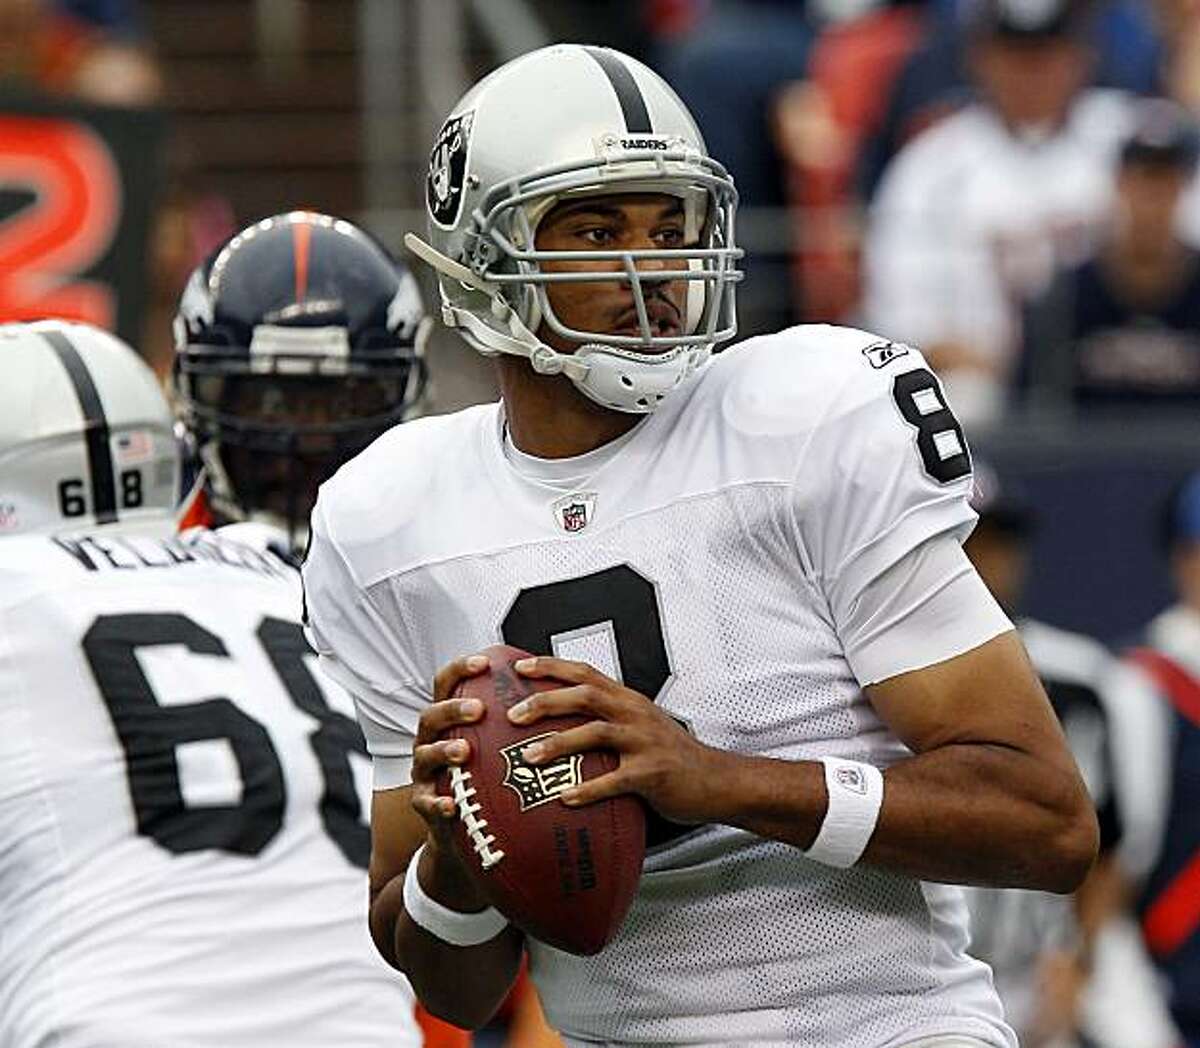 Oakland Raiders quarterback Jason Campbell looks for a receiver during the first half of an NFL football game against the Denver Broncos, Sunday, Oct. 24, 2010, in Denver.